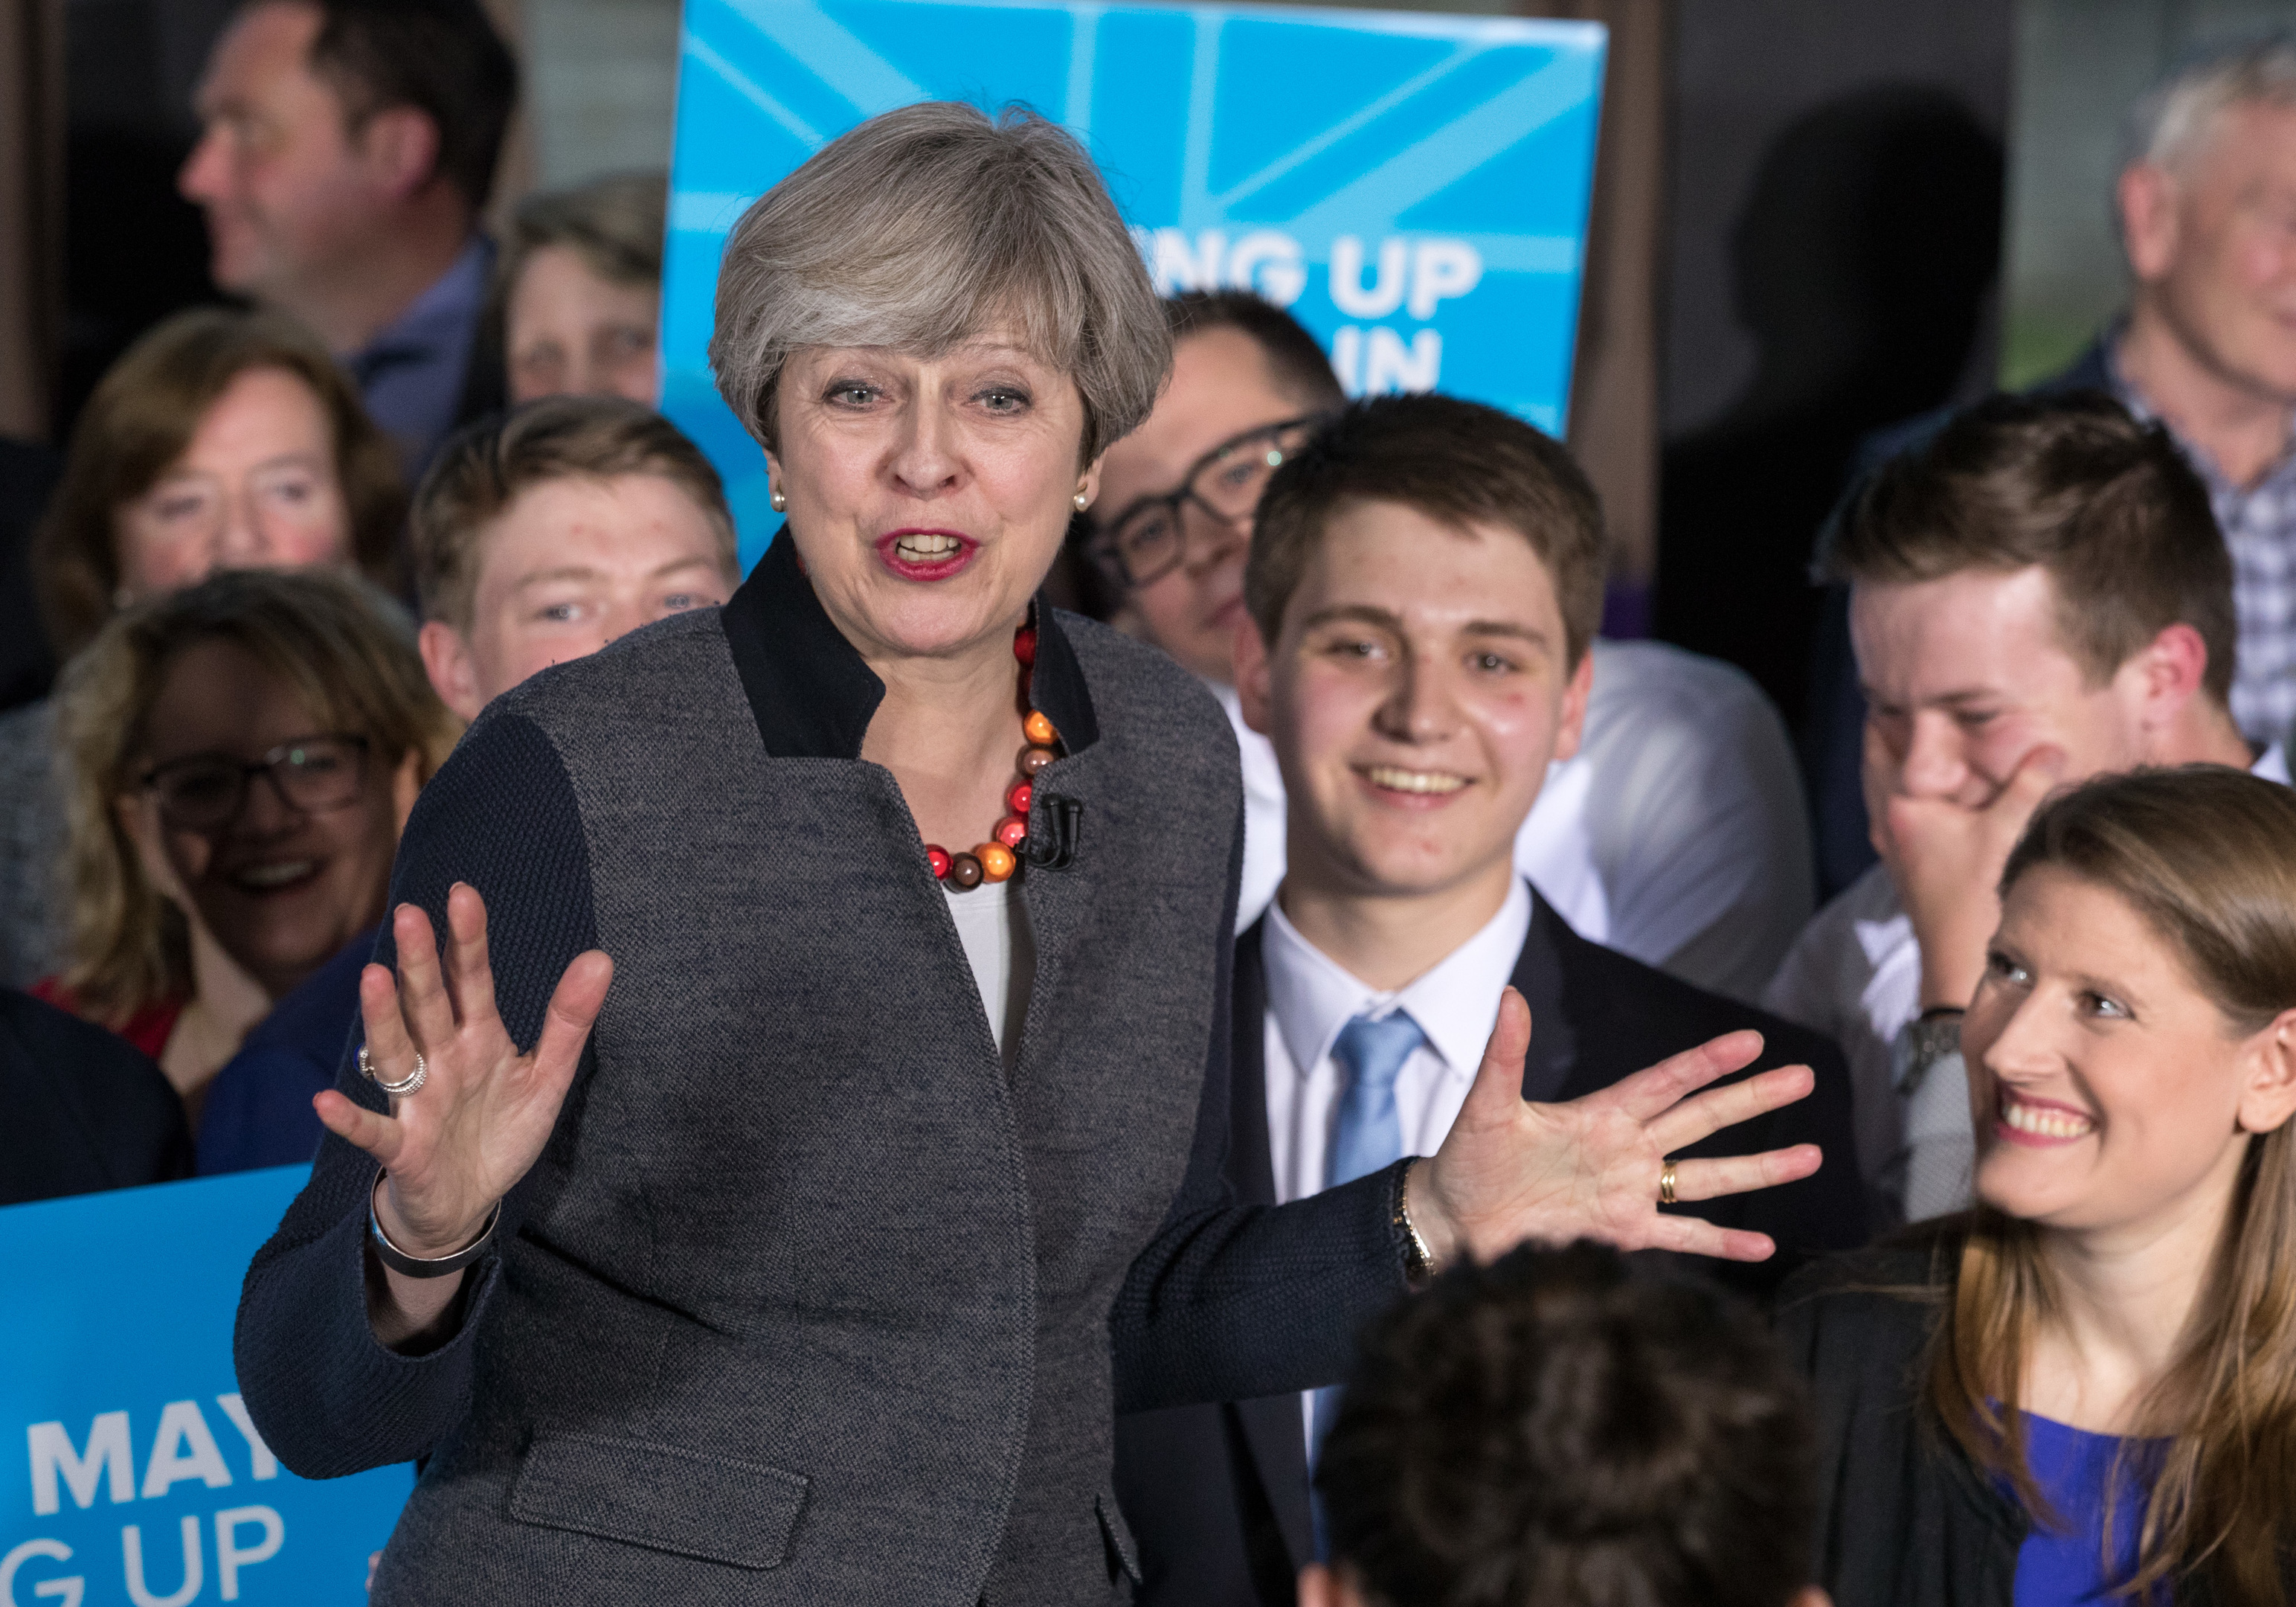 Prime Minister Theresa May addresses an audience of supporters (Matt Cardy/Getty Images)